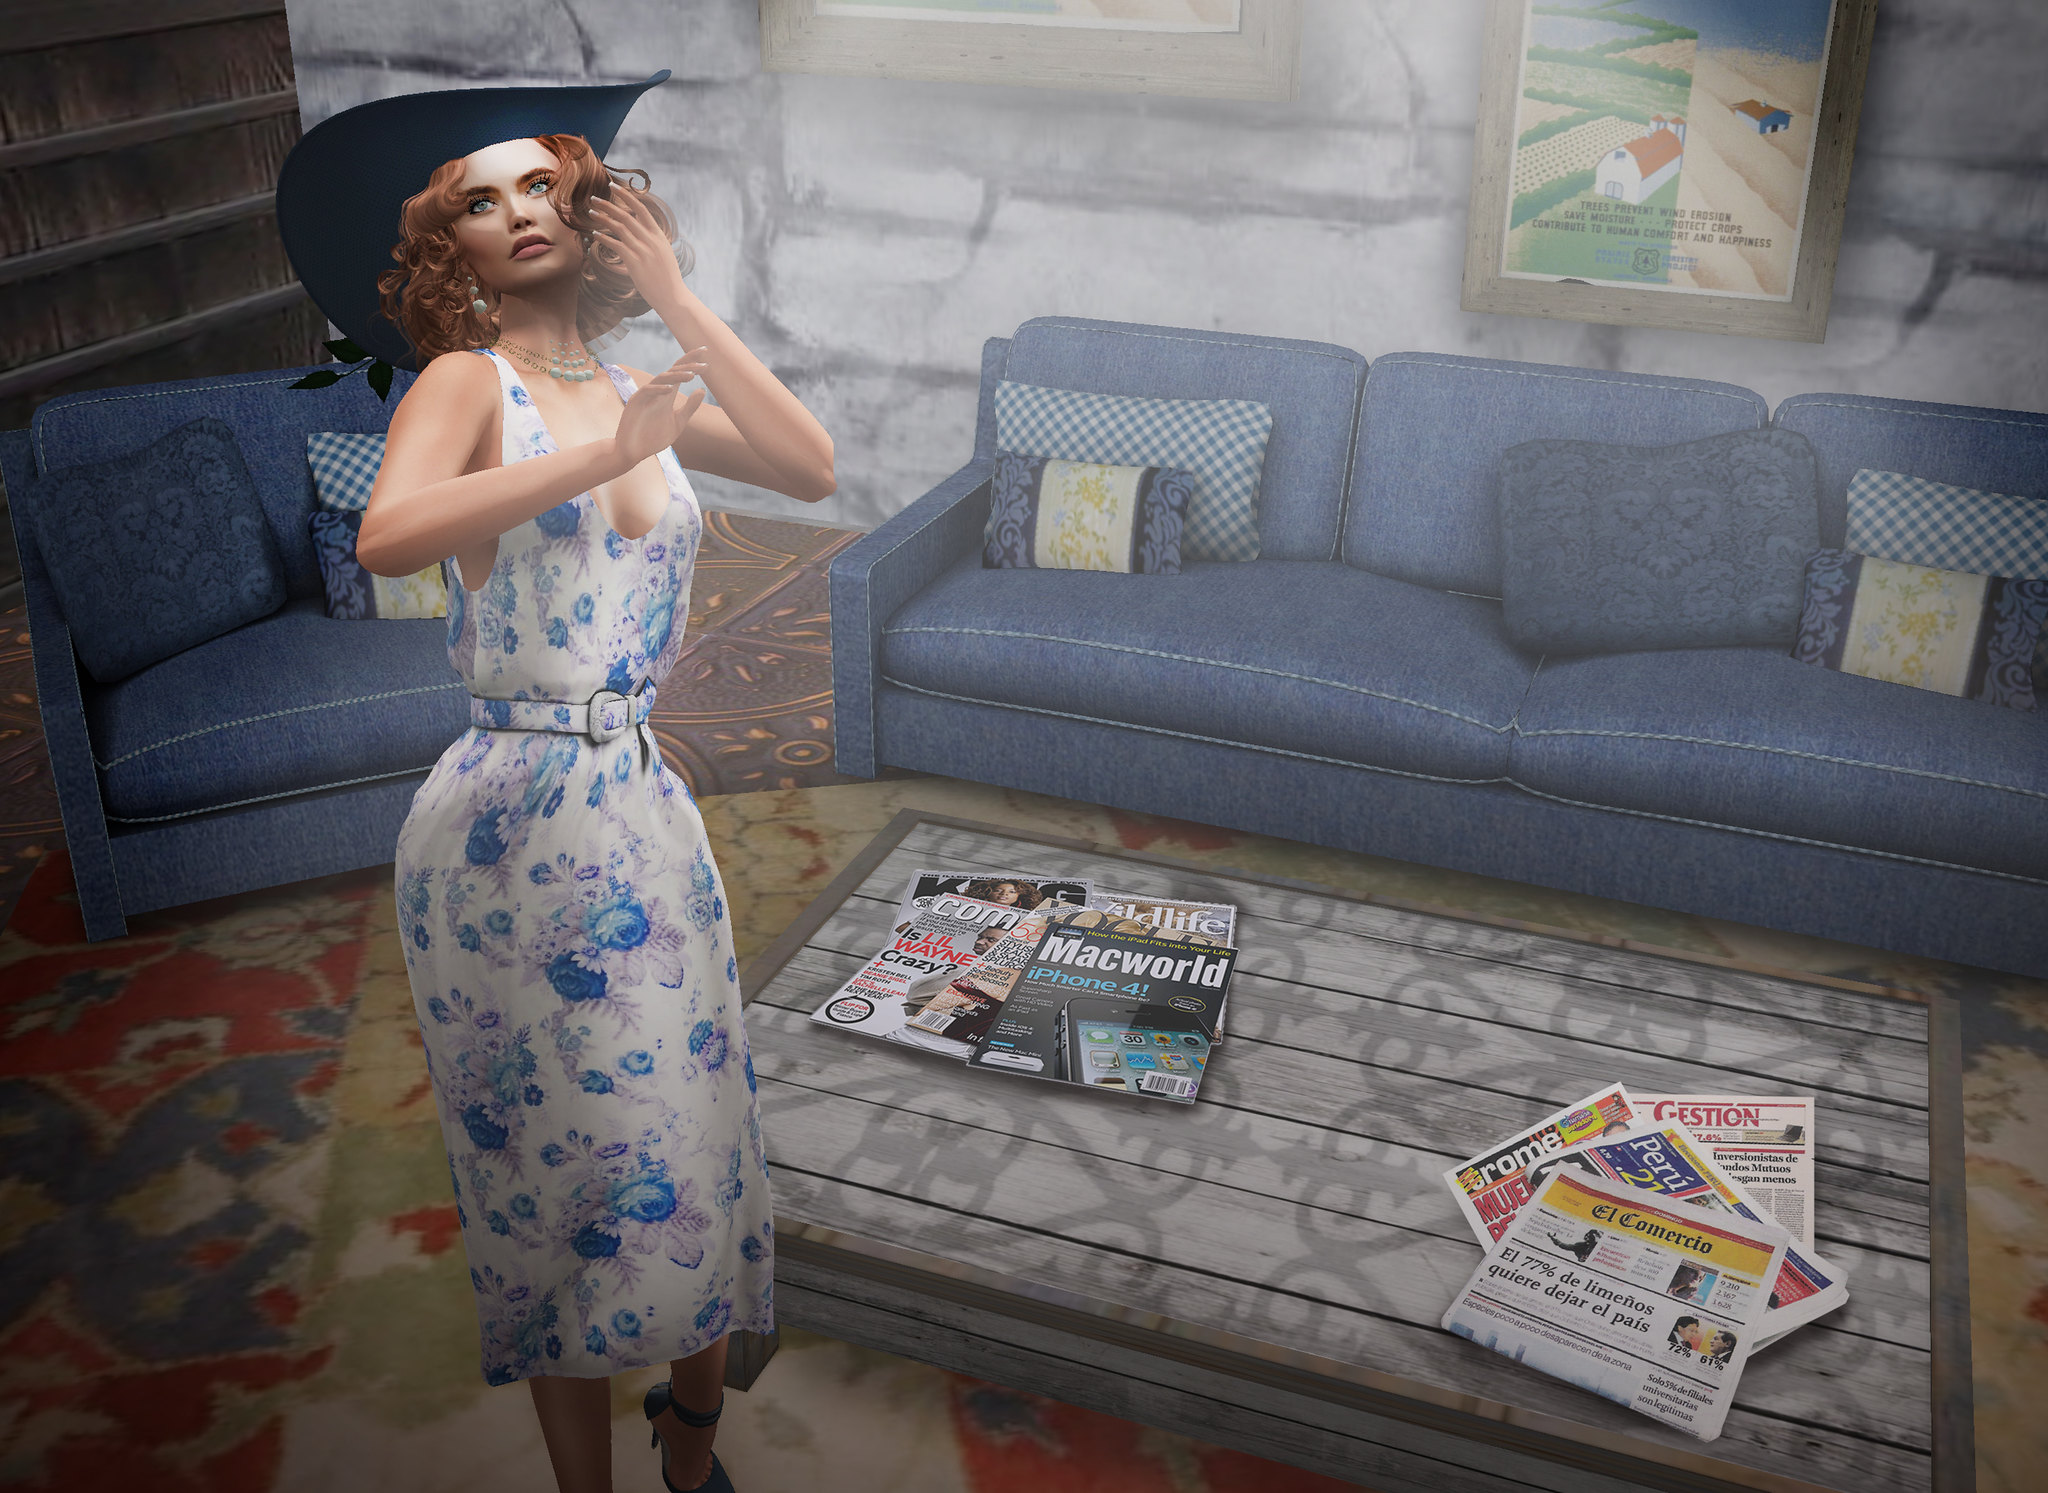 NEW!!! The Vintage Touch at SWANK EVENT / .:EMO-tions:. at HAIR FAIR